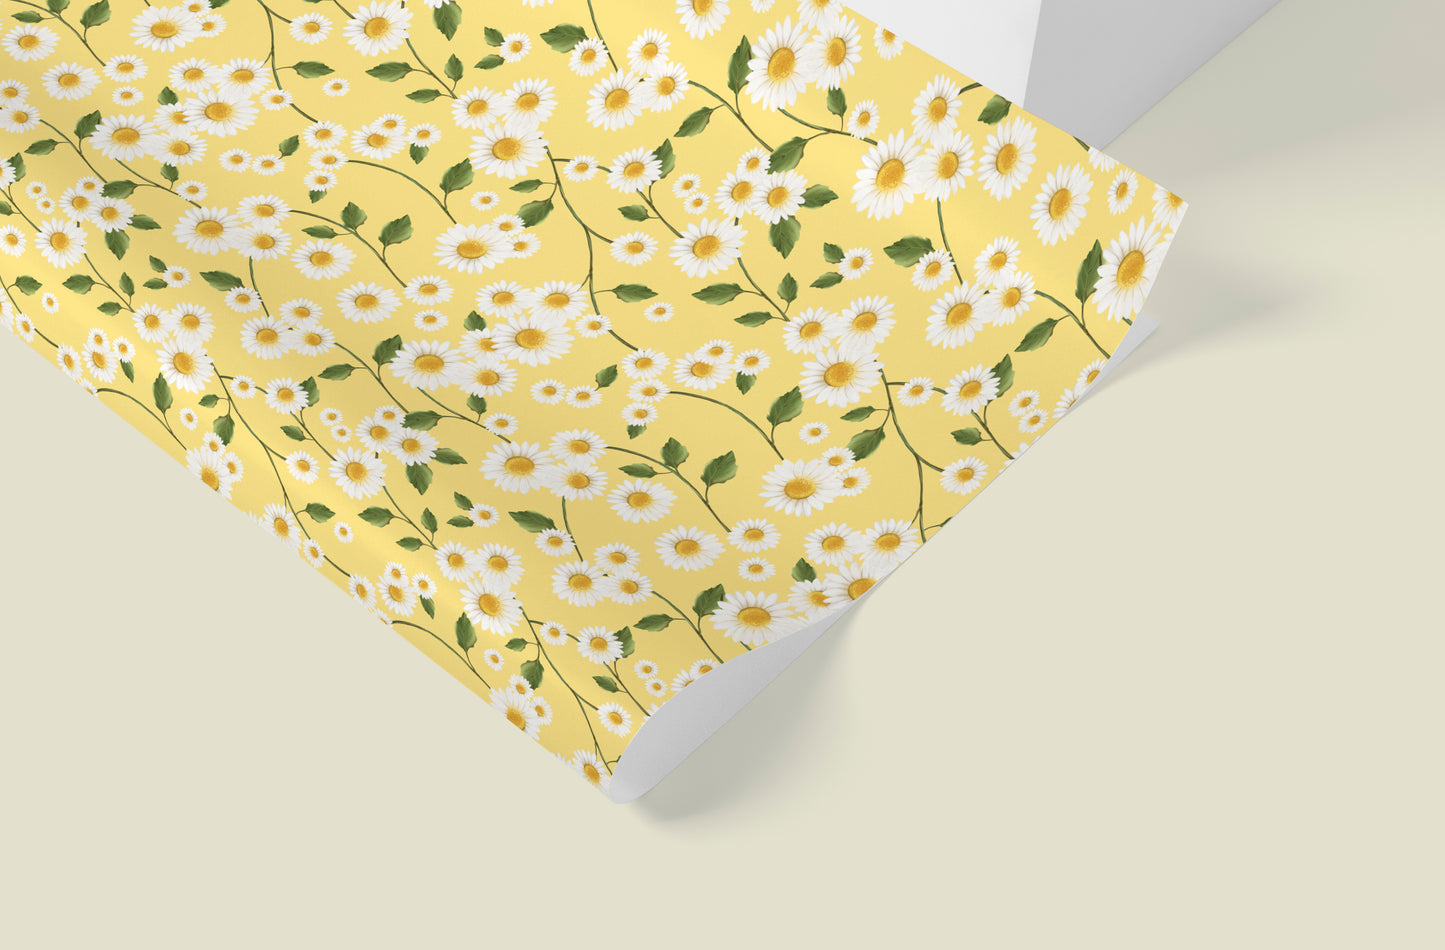 Daisy Flowers in Yellow Wrapping Paper- Studio Q - Art by Nicky Quartermaine Scott